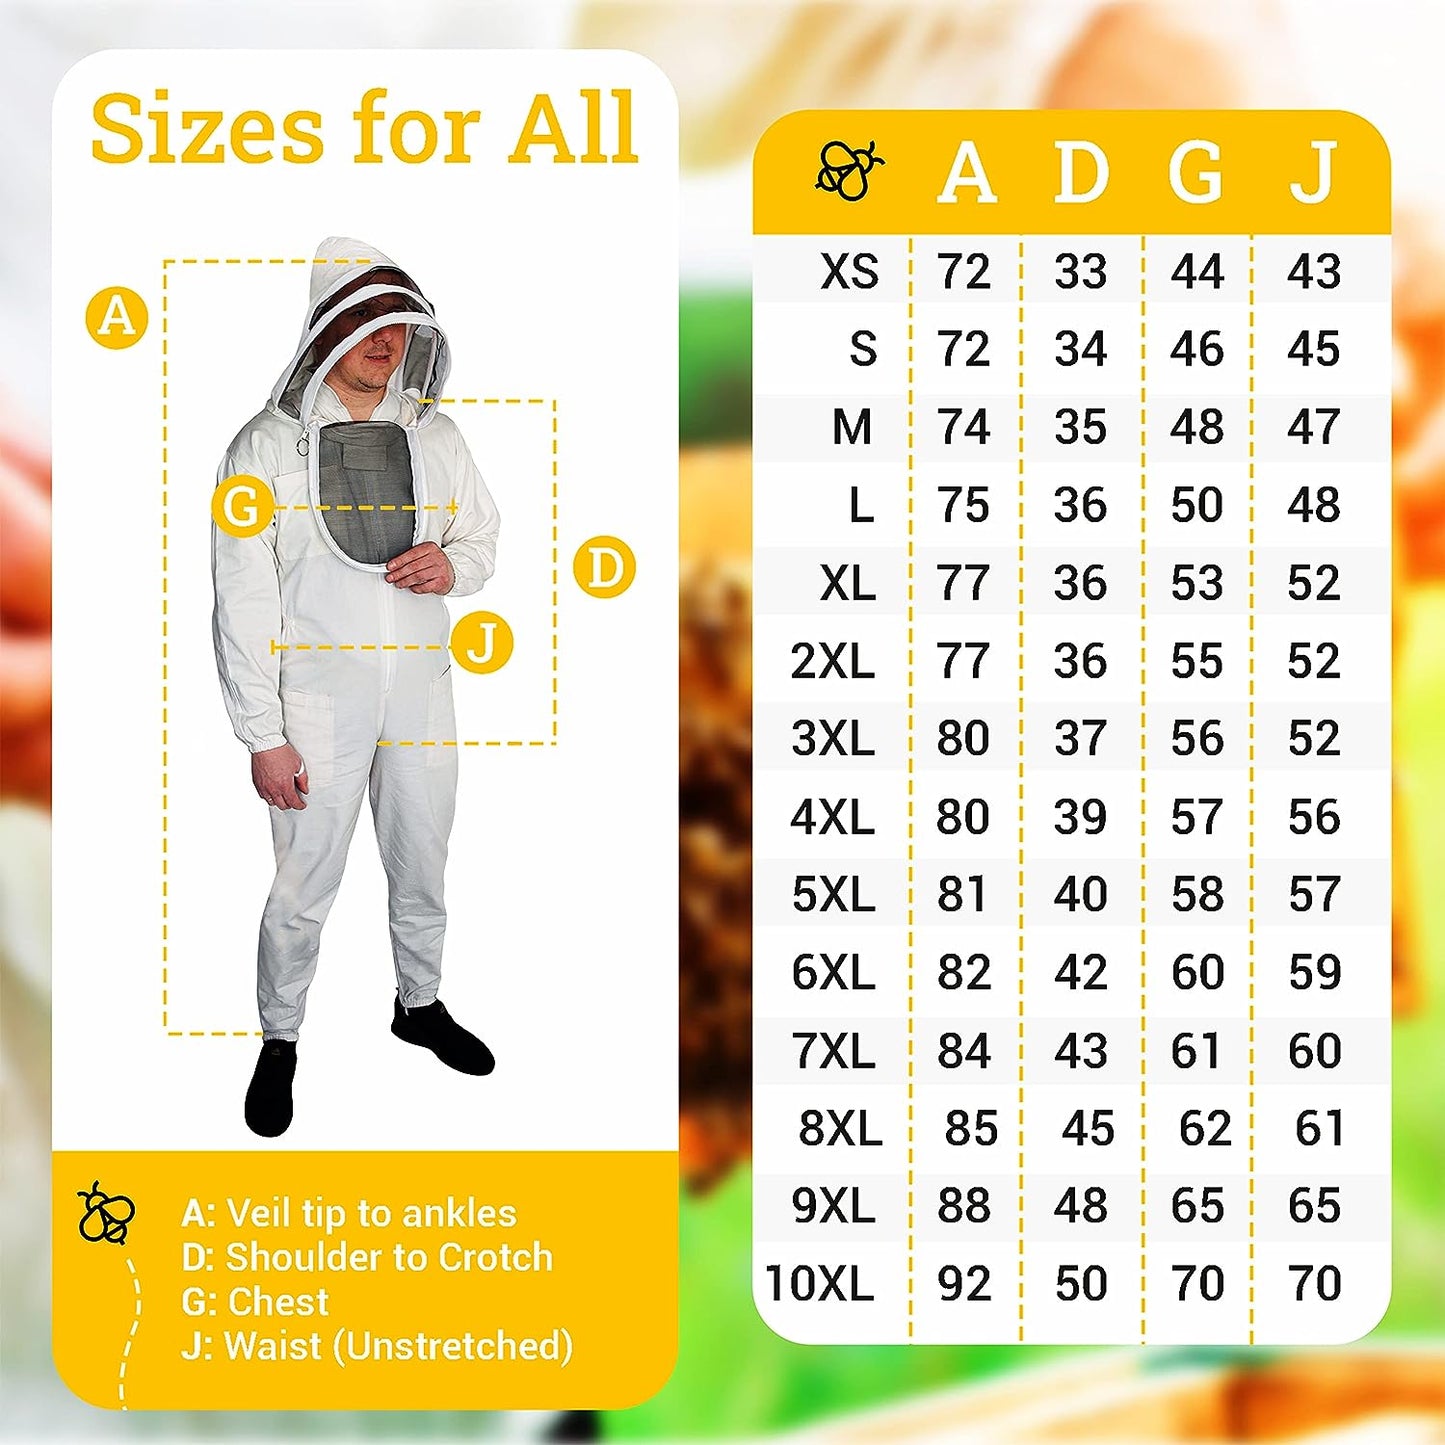 Bbeeattire Professional Beekeeper suit with Easy Veil- Thick Cotton Bee Suit Sting-Less Protection